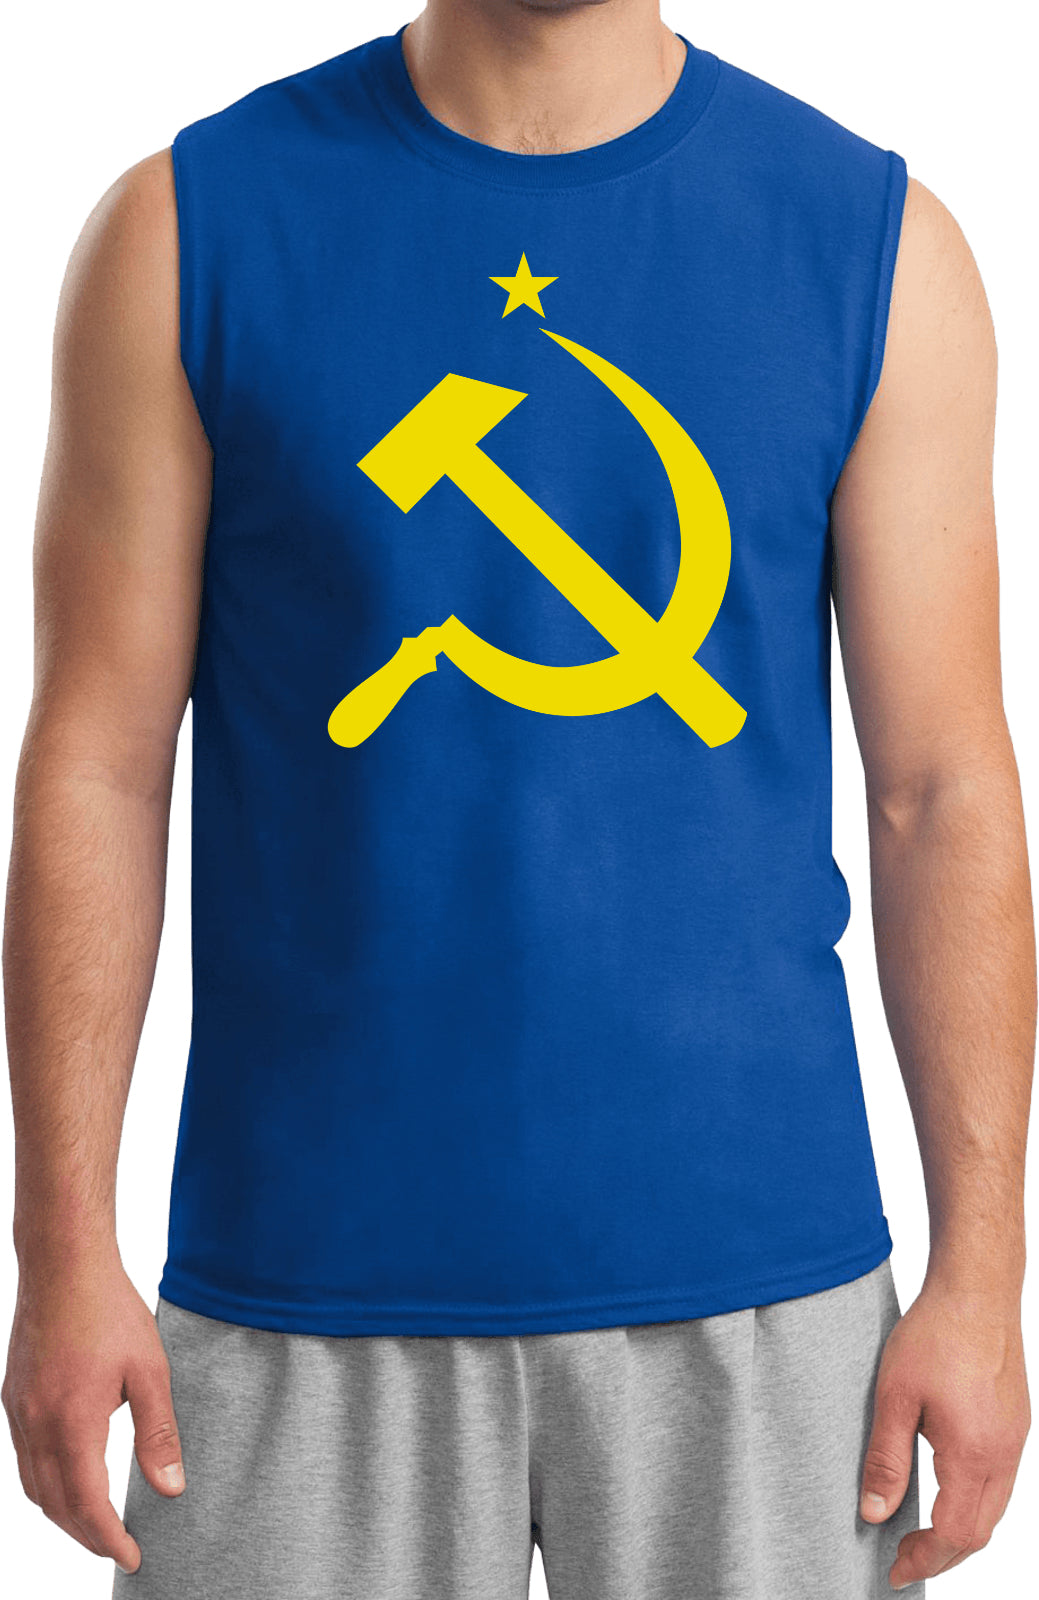 Soviet Union T-shirt Yellow Hammer and Sickle Muscle Tee